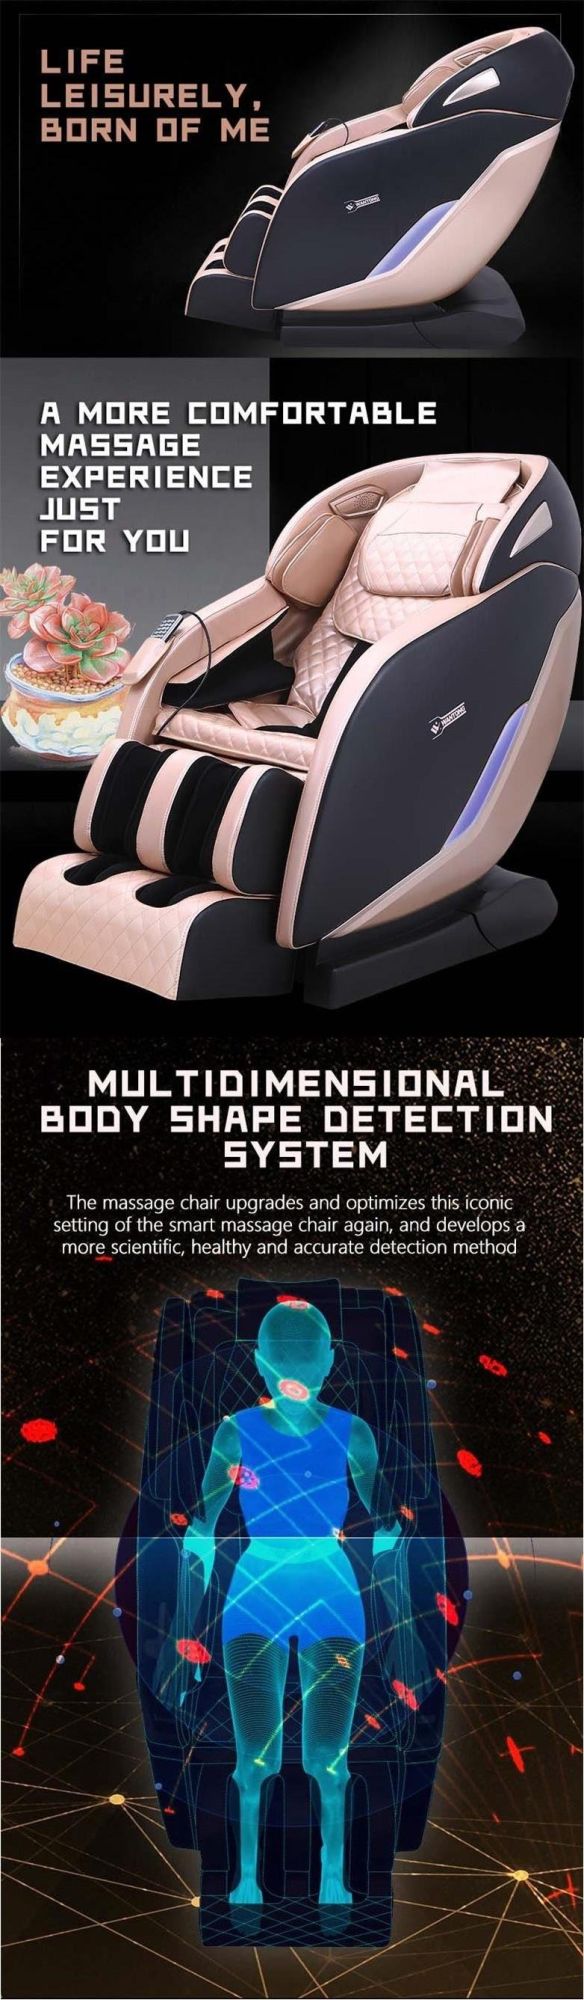 2020 Wholesale High Quality Body Care Luxury Family Healthcare 3D Massage Chair